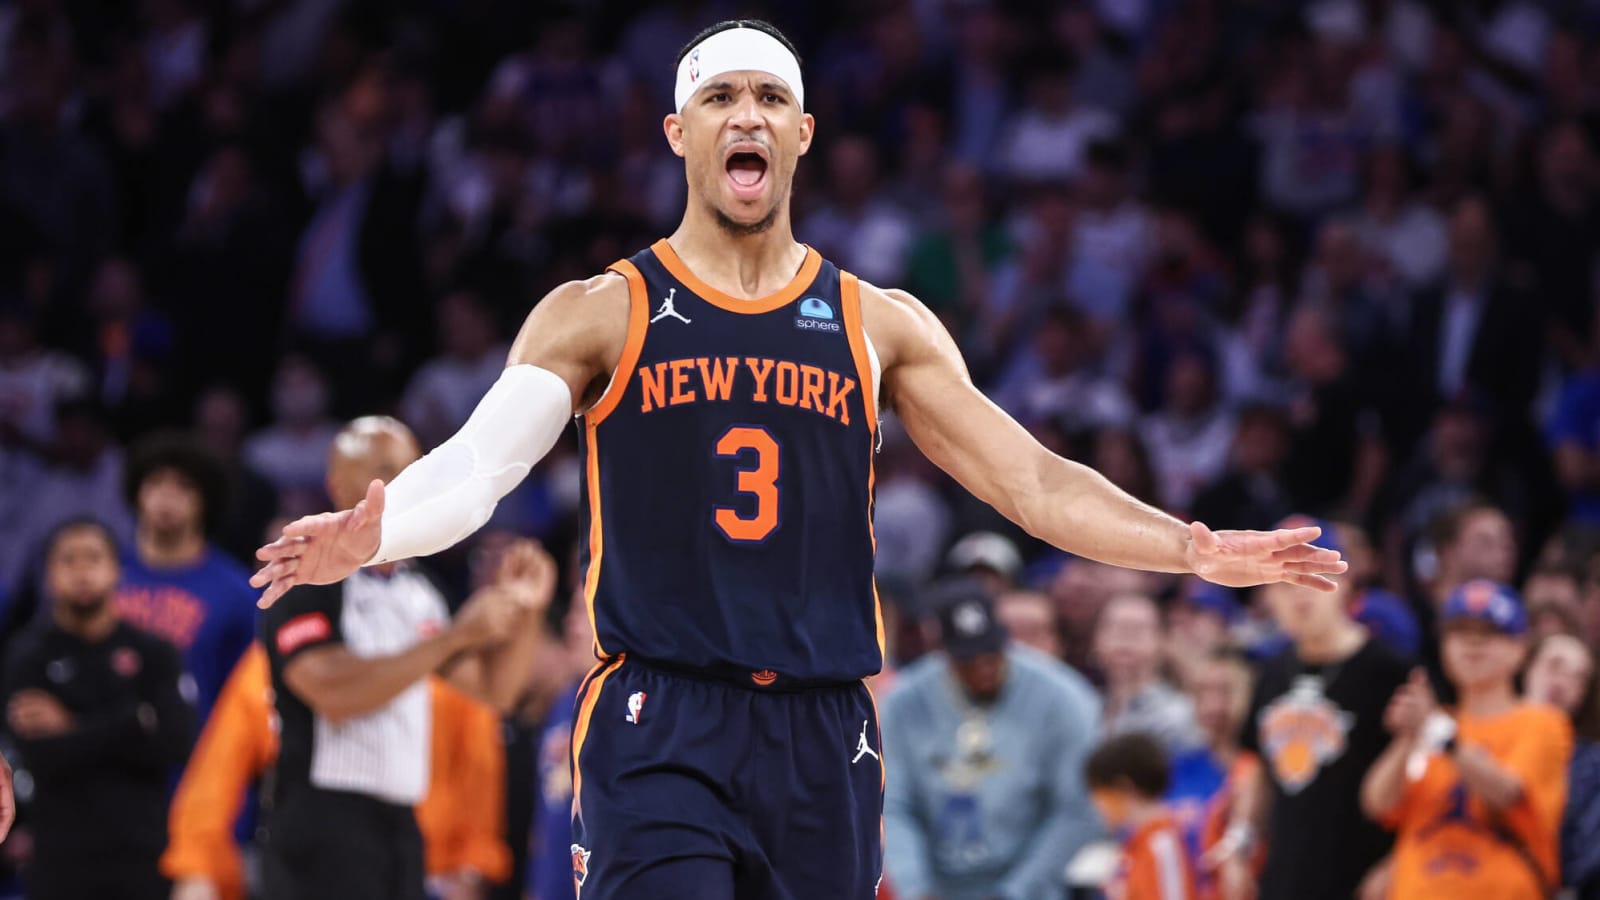 New York Knicks’ Josh Hart Shares Thoughts After Incredible 48-Minute Performance vs Pacers